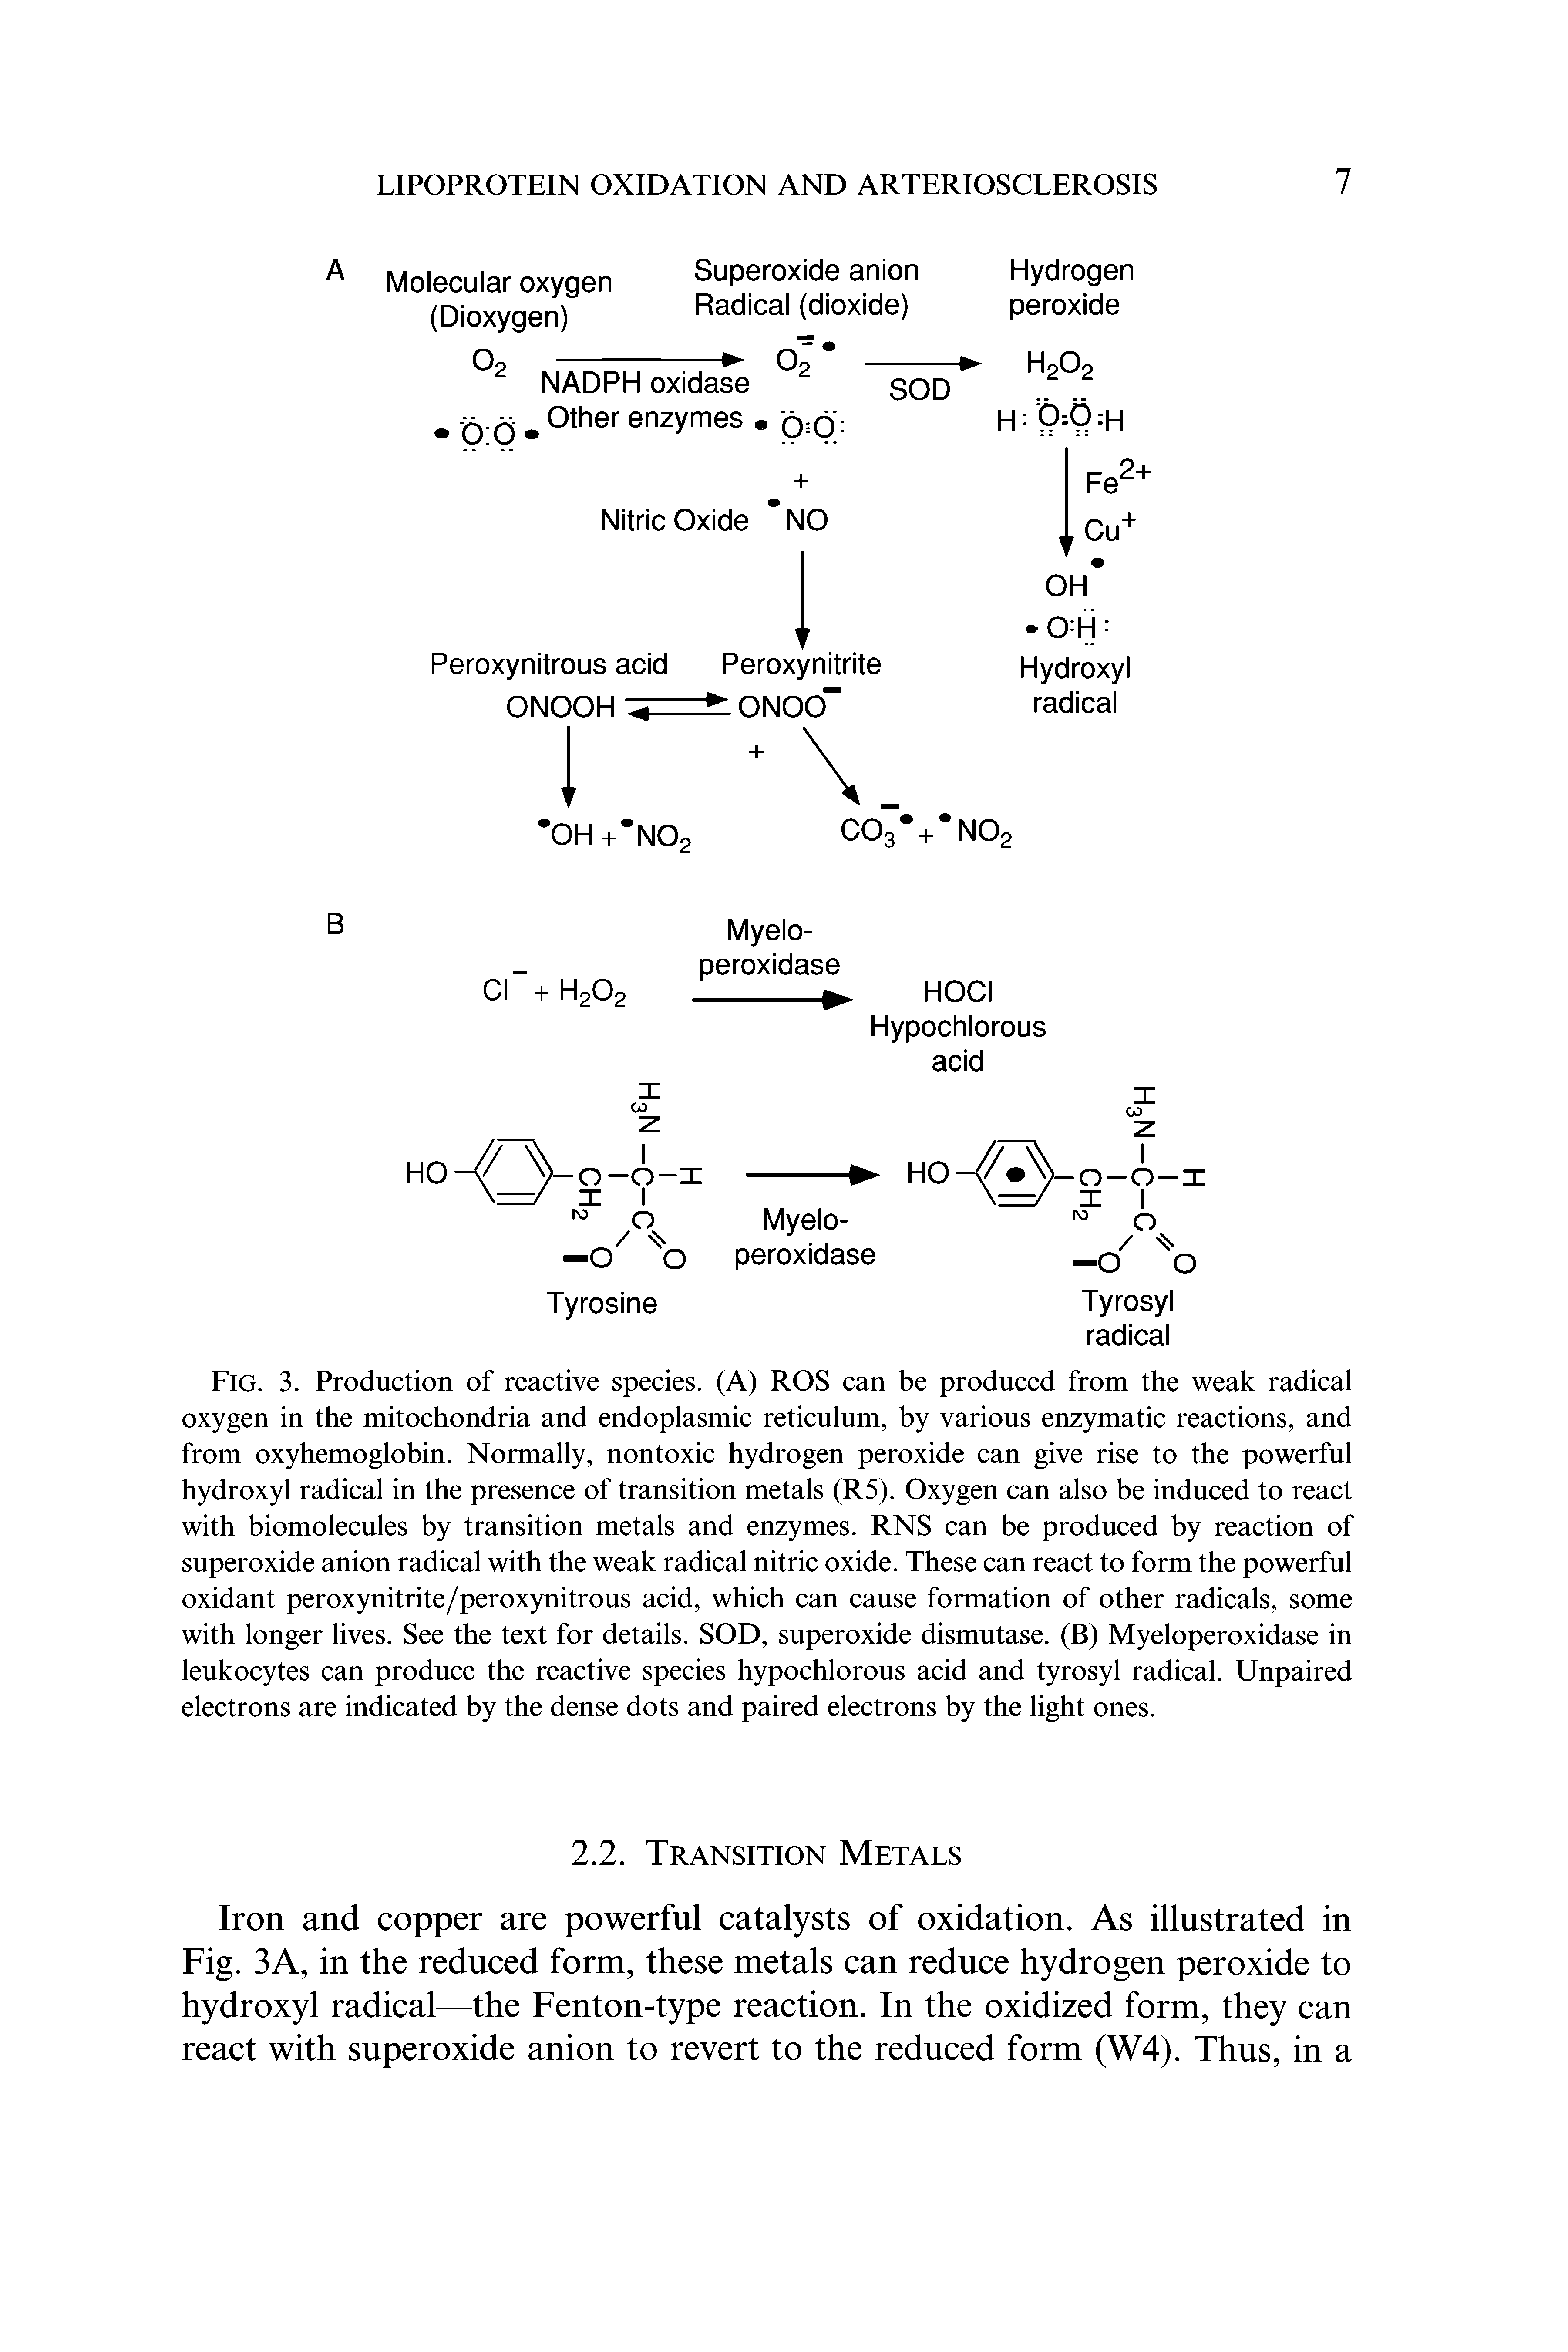 Fig. 3. Production of reactive species. (A) ROS can be produced from the weak radical oxygen in the mitochondria and endoplasmic reticulum, by various enzymatic reactions, and from oxyhemoglobin. Normally, nontoxic hydrogen peroxide can give rise to the powerful hydroxyl radical in the presence of transition metals (R5). Oxygen can also be induced to react with biomolecules by transition metals and enzymes. RNS can be produced by reaction of superoxide anion radical with the weak radical nitric oxide. These can react to form the powerful oxidant peroxynitrite/peroxynitrous acid, which can cause formation of other radicals, some with longer lives. See the text for details. SOD, superoxide dismutase. (B) Myeloperoxidase in leukocytes can produce the reactive species hypochlorous acid and tyrosyl radical. Unpaired electrons are indicated by the dense dots and paired electrons by the light ones.